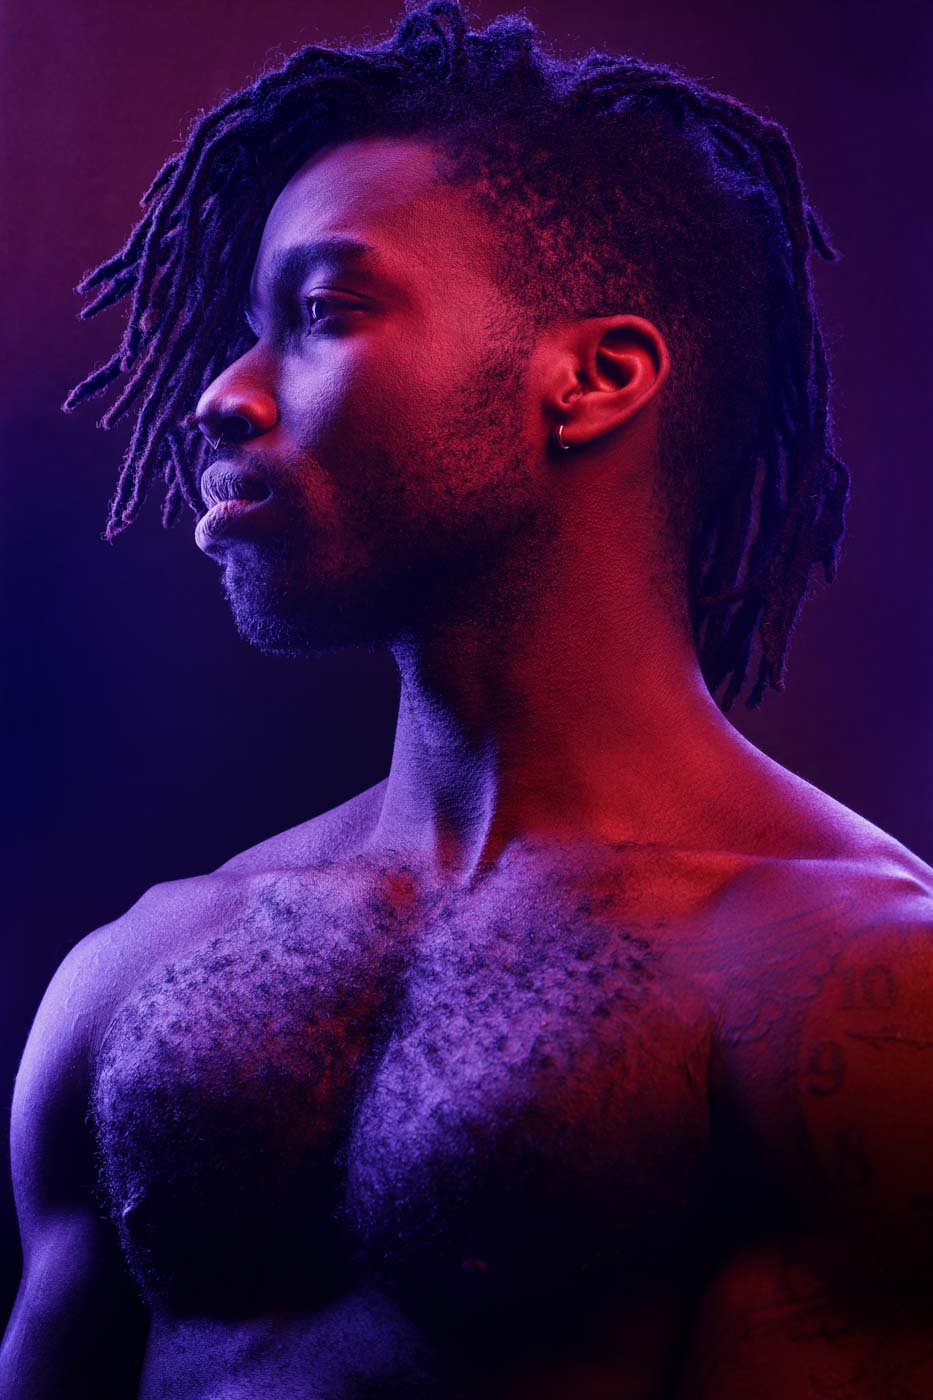 Artistic gel lighting portrait of Prince, illustrating creative use of light and color in model portfolios by John Gress Photography.